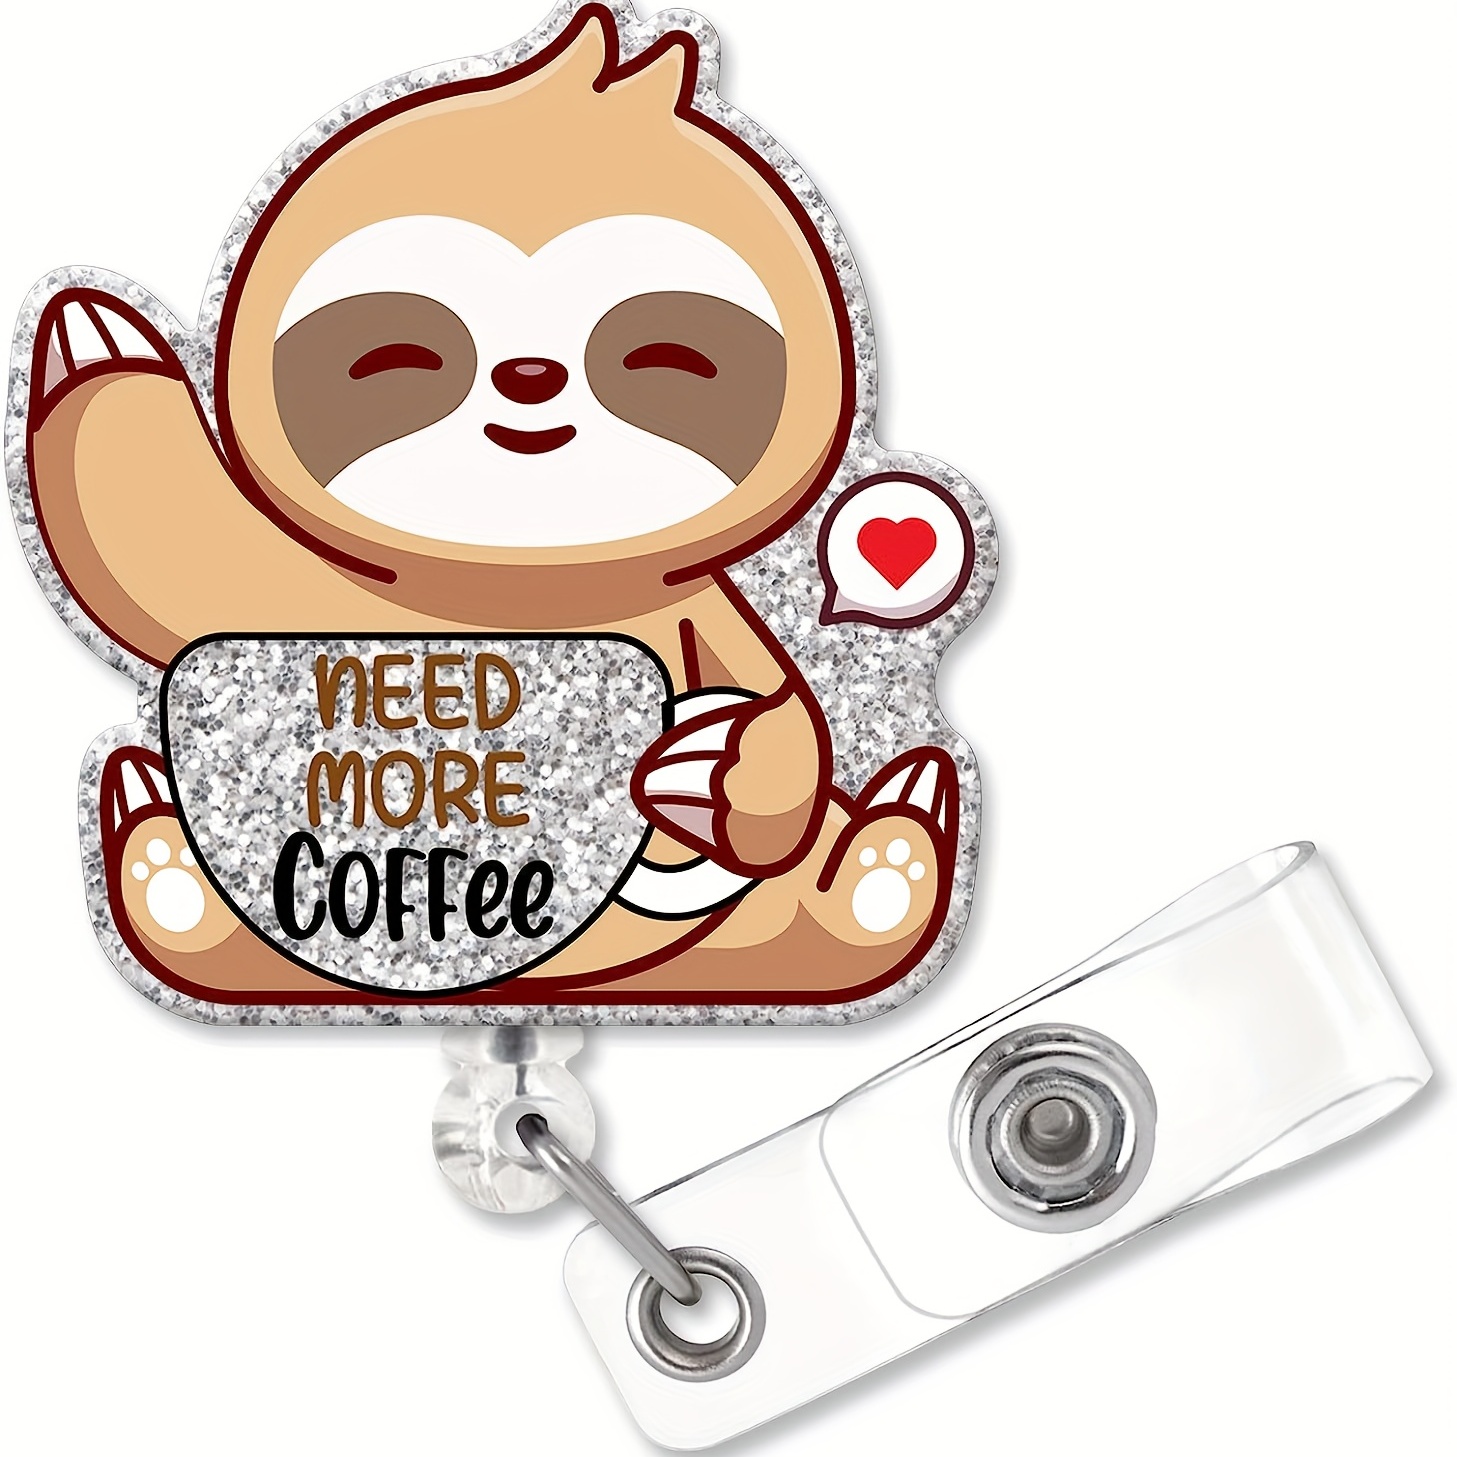 ZBCFSCSB Need More Coffee Funny Shaped Badge Reel Holder With Metal Shark  Clip, Office Hospital Lab Work ID Tag, Badge Gift For Nurse, Gift For Doctor